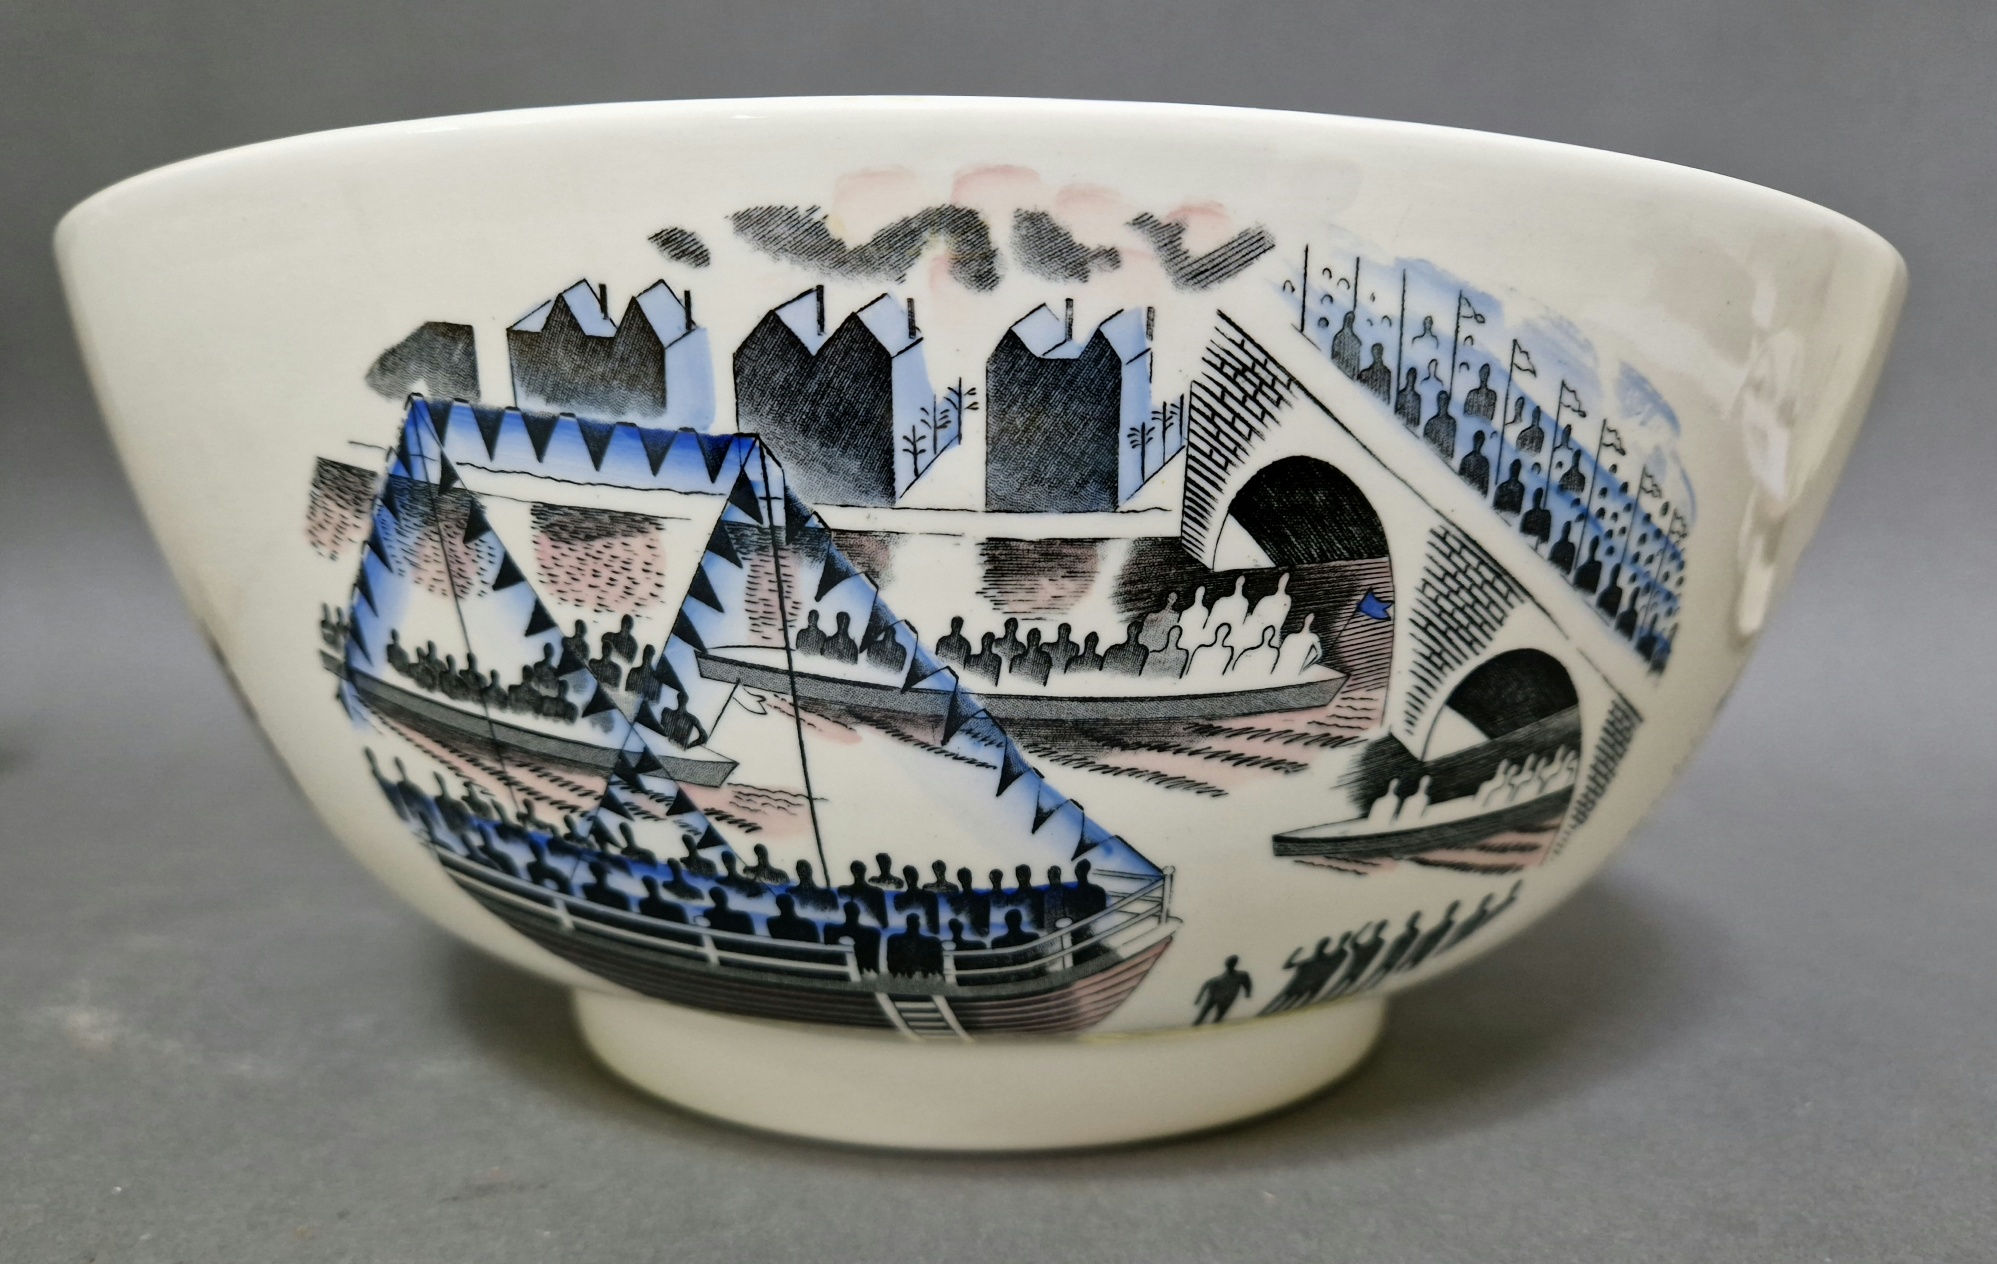 A 1975 Wedgwood Boat Race bowl designed by Eric Ravilious , limited edition no. 133/200, with box - Image 8 of 11